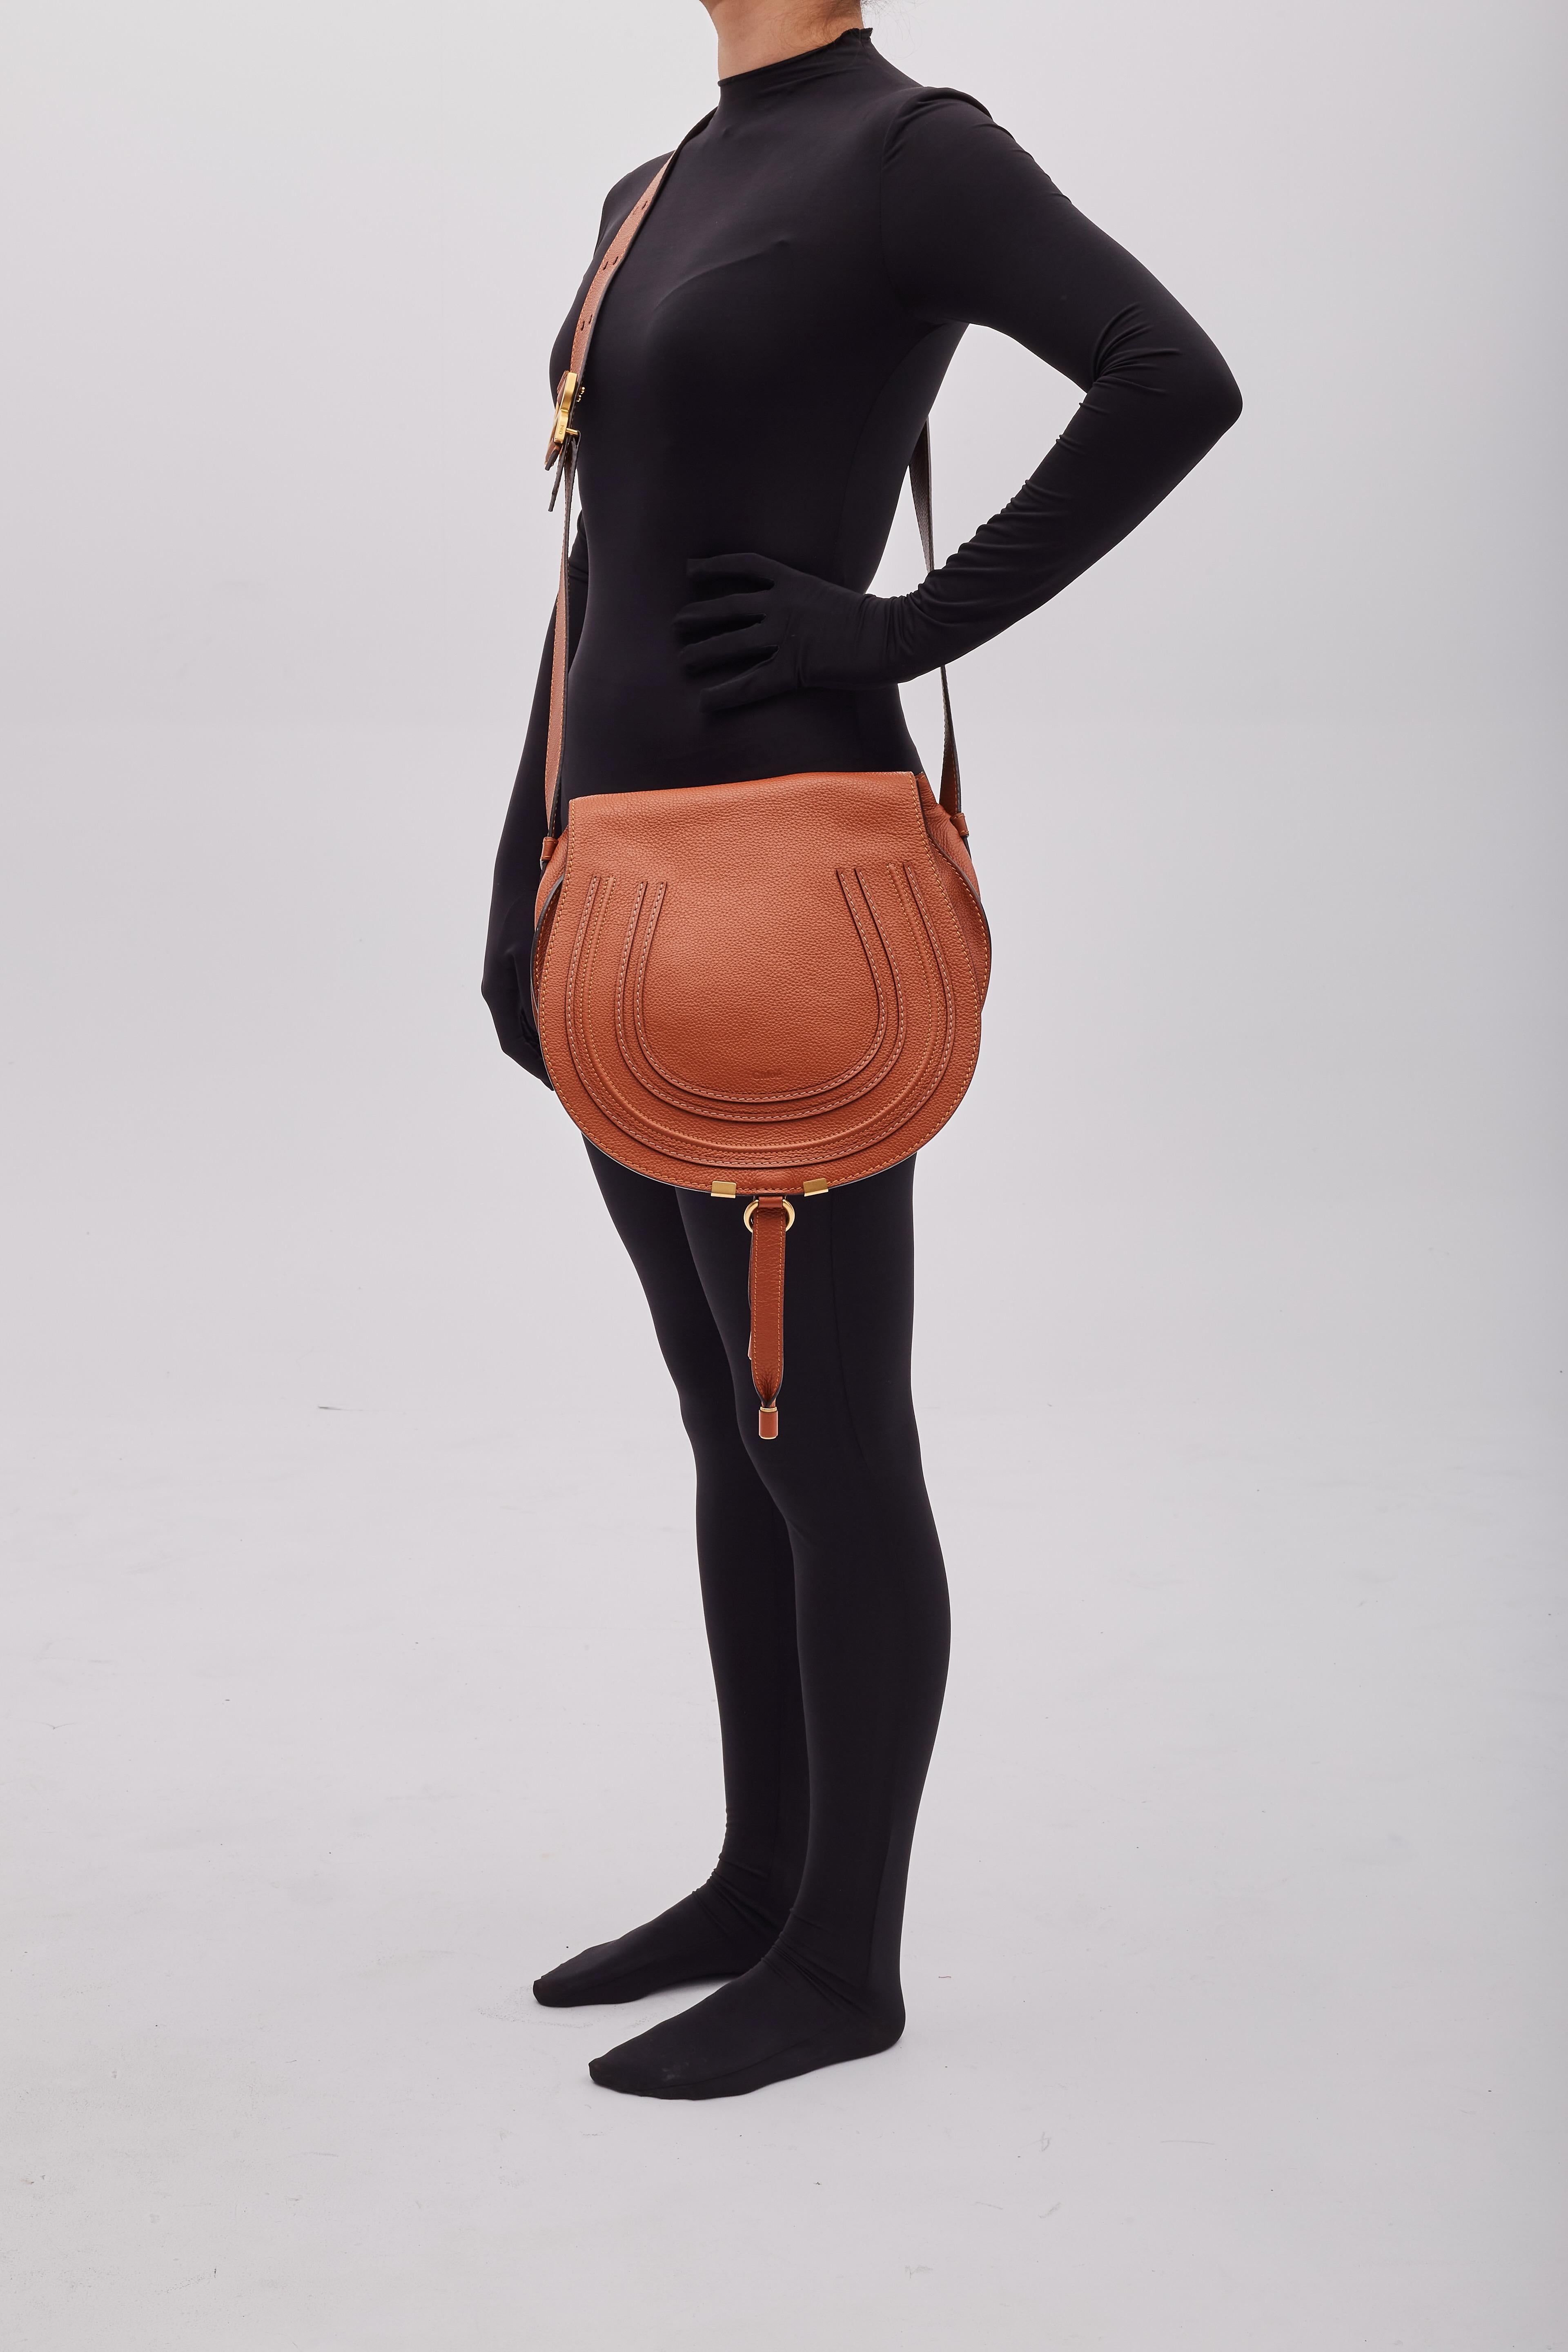 This stylish hobo is bag is made of grained textured calfskin leather in cognac brown /caramel. The bag features an adjustable crossbody strap, a facing flap with detailed stitching, a front tassel an antiqued gold tone hardware. The flap opens to a